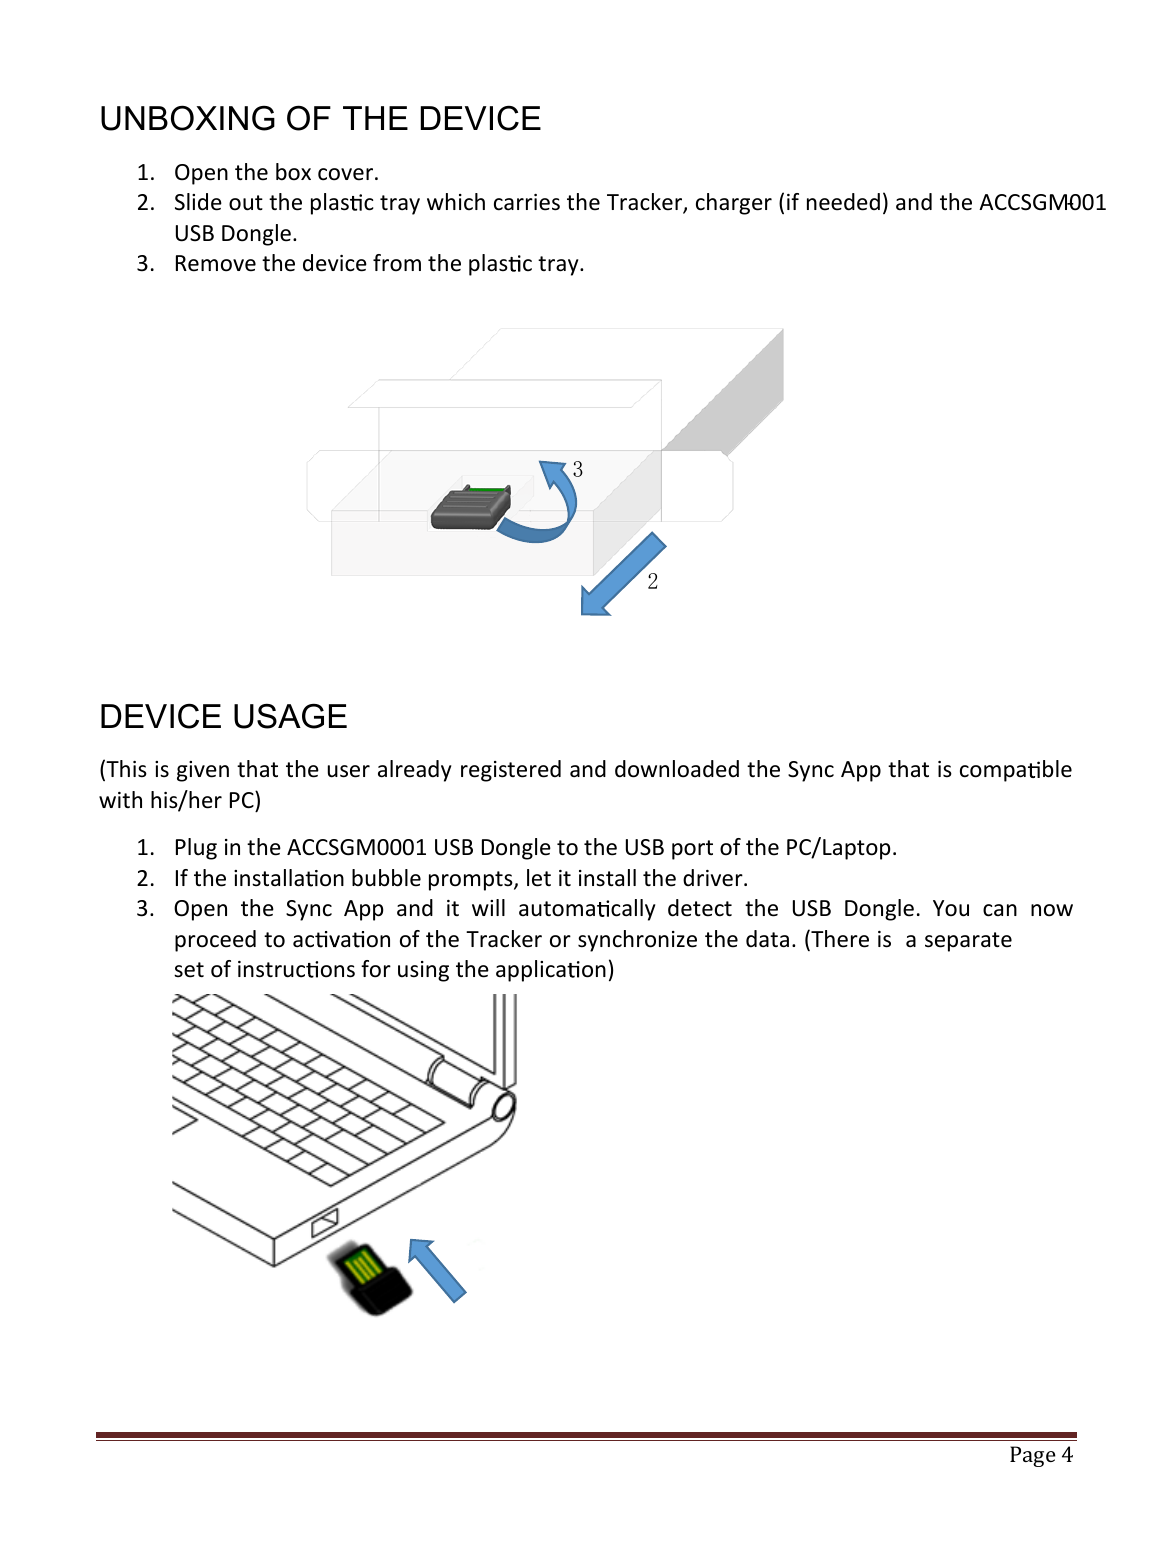   Page 4   UNBOXING OF THE DEVICE 1. Open the box cover. 2. Slide out the plas c tray which carries the Tracker, charger (if needed) and the ACCSGM001-USB Dongle.  3. Remove the device from the plas c tray.         DEVICE USAGE (This is given that the user already registered and downloaded the Sync App that is compa ble with his/her PC) 1. Plug in the ACCSGM0001 USB Dongle to the USB port of the PC/Laptop. 2. If the installa on bubble prompts, let it install the driver. 3. Open  the  Sync  App  and  it  will  automa cally  detect  the  USB  Dongle.  You  can  now proceed to ac a on of the Tracker or synchronize the data. (There is  a separate set of instruc ons for using the applica on)        3 2 